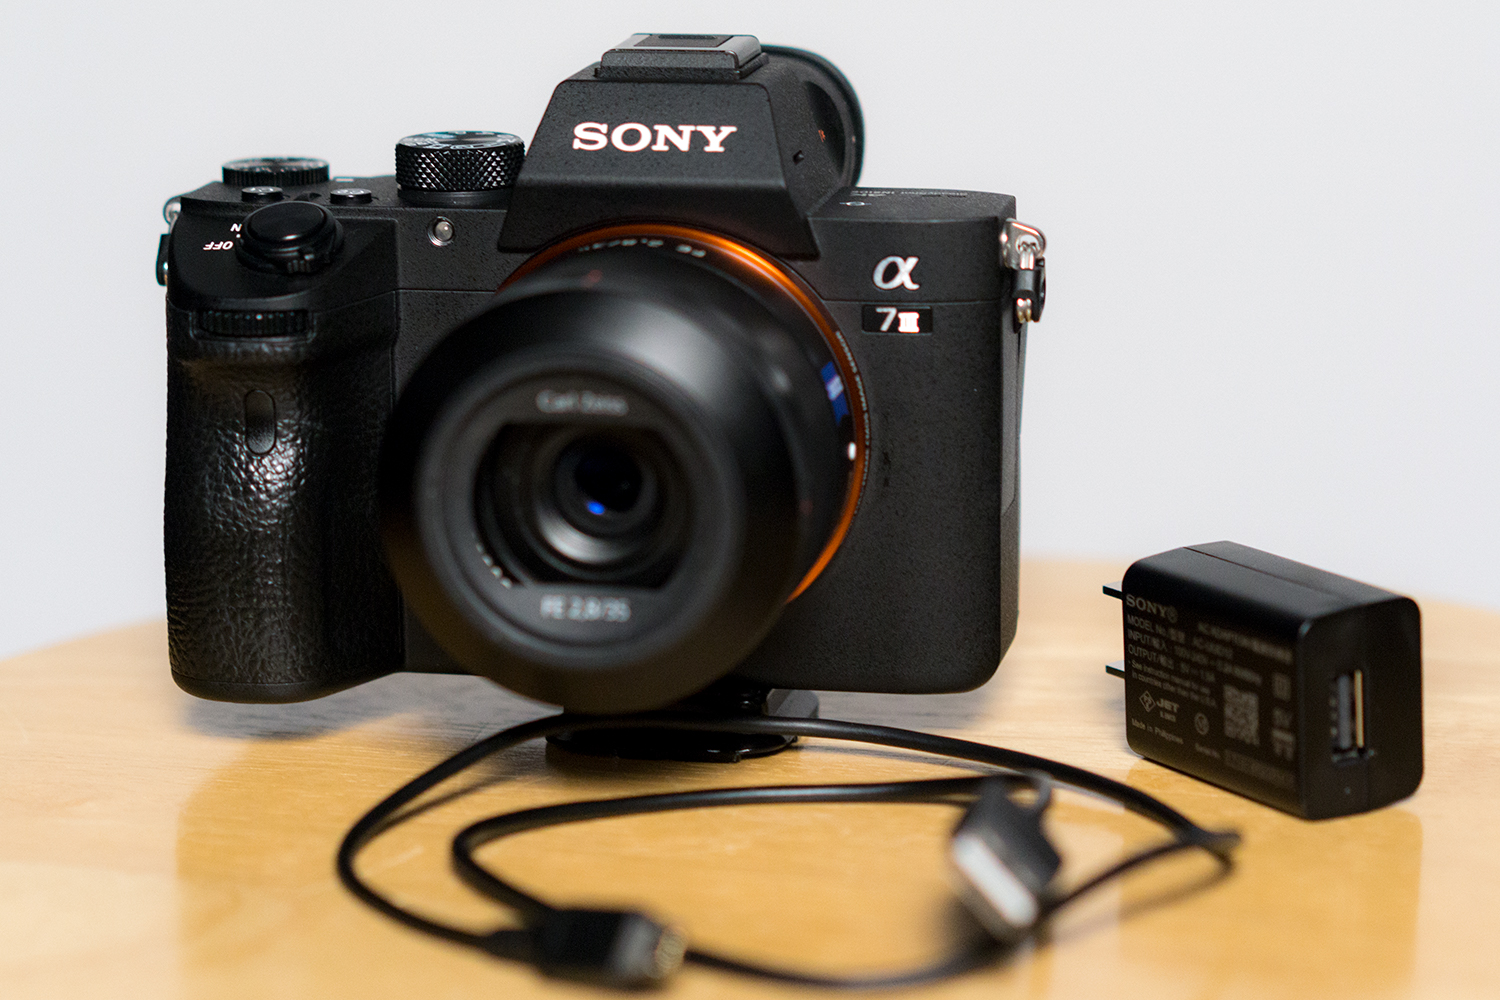 Teenageår hypotese Yoghurt Battery and charger options for the "charger-less" Sony a7 III - Newsshooter